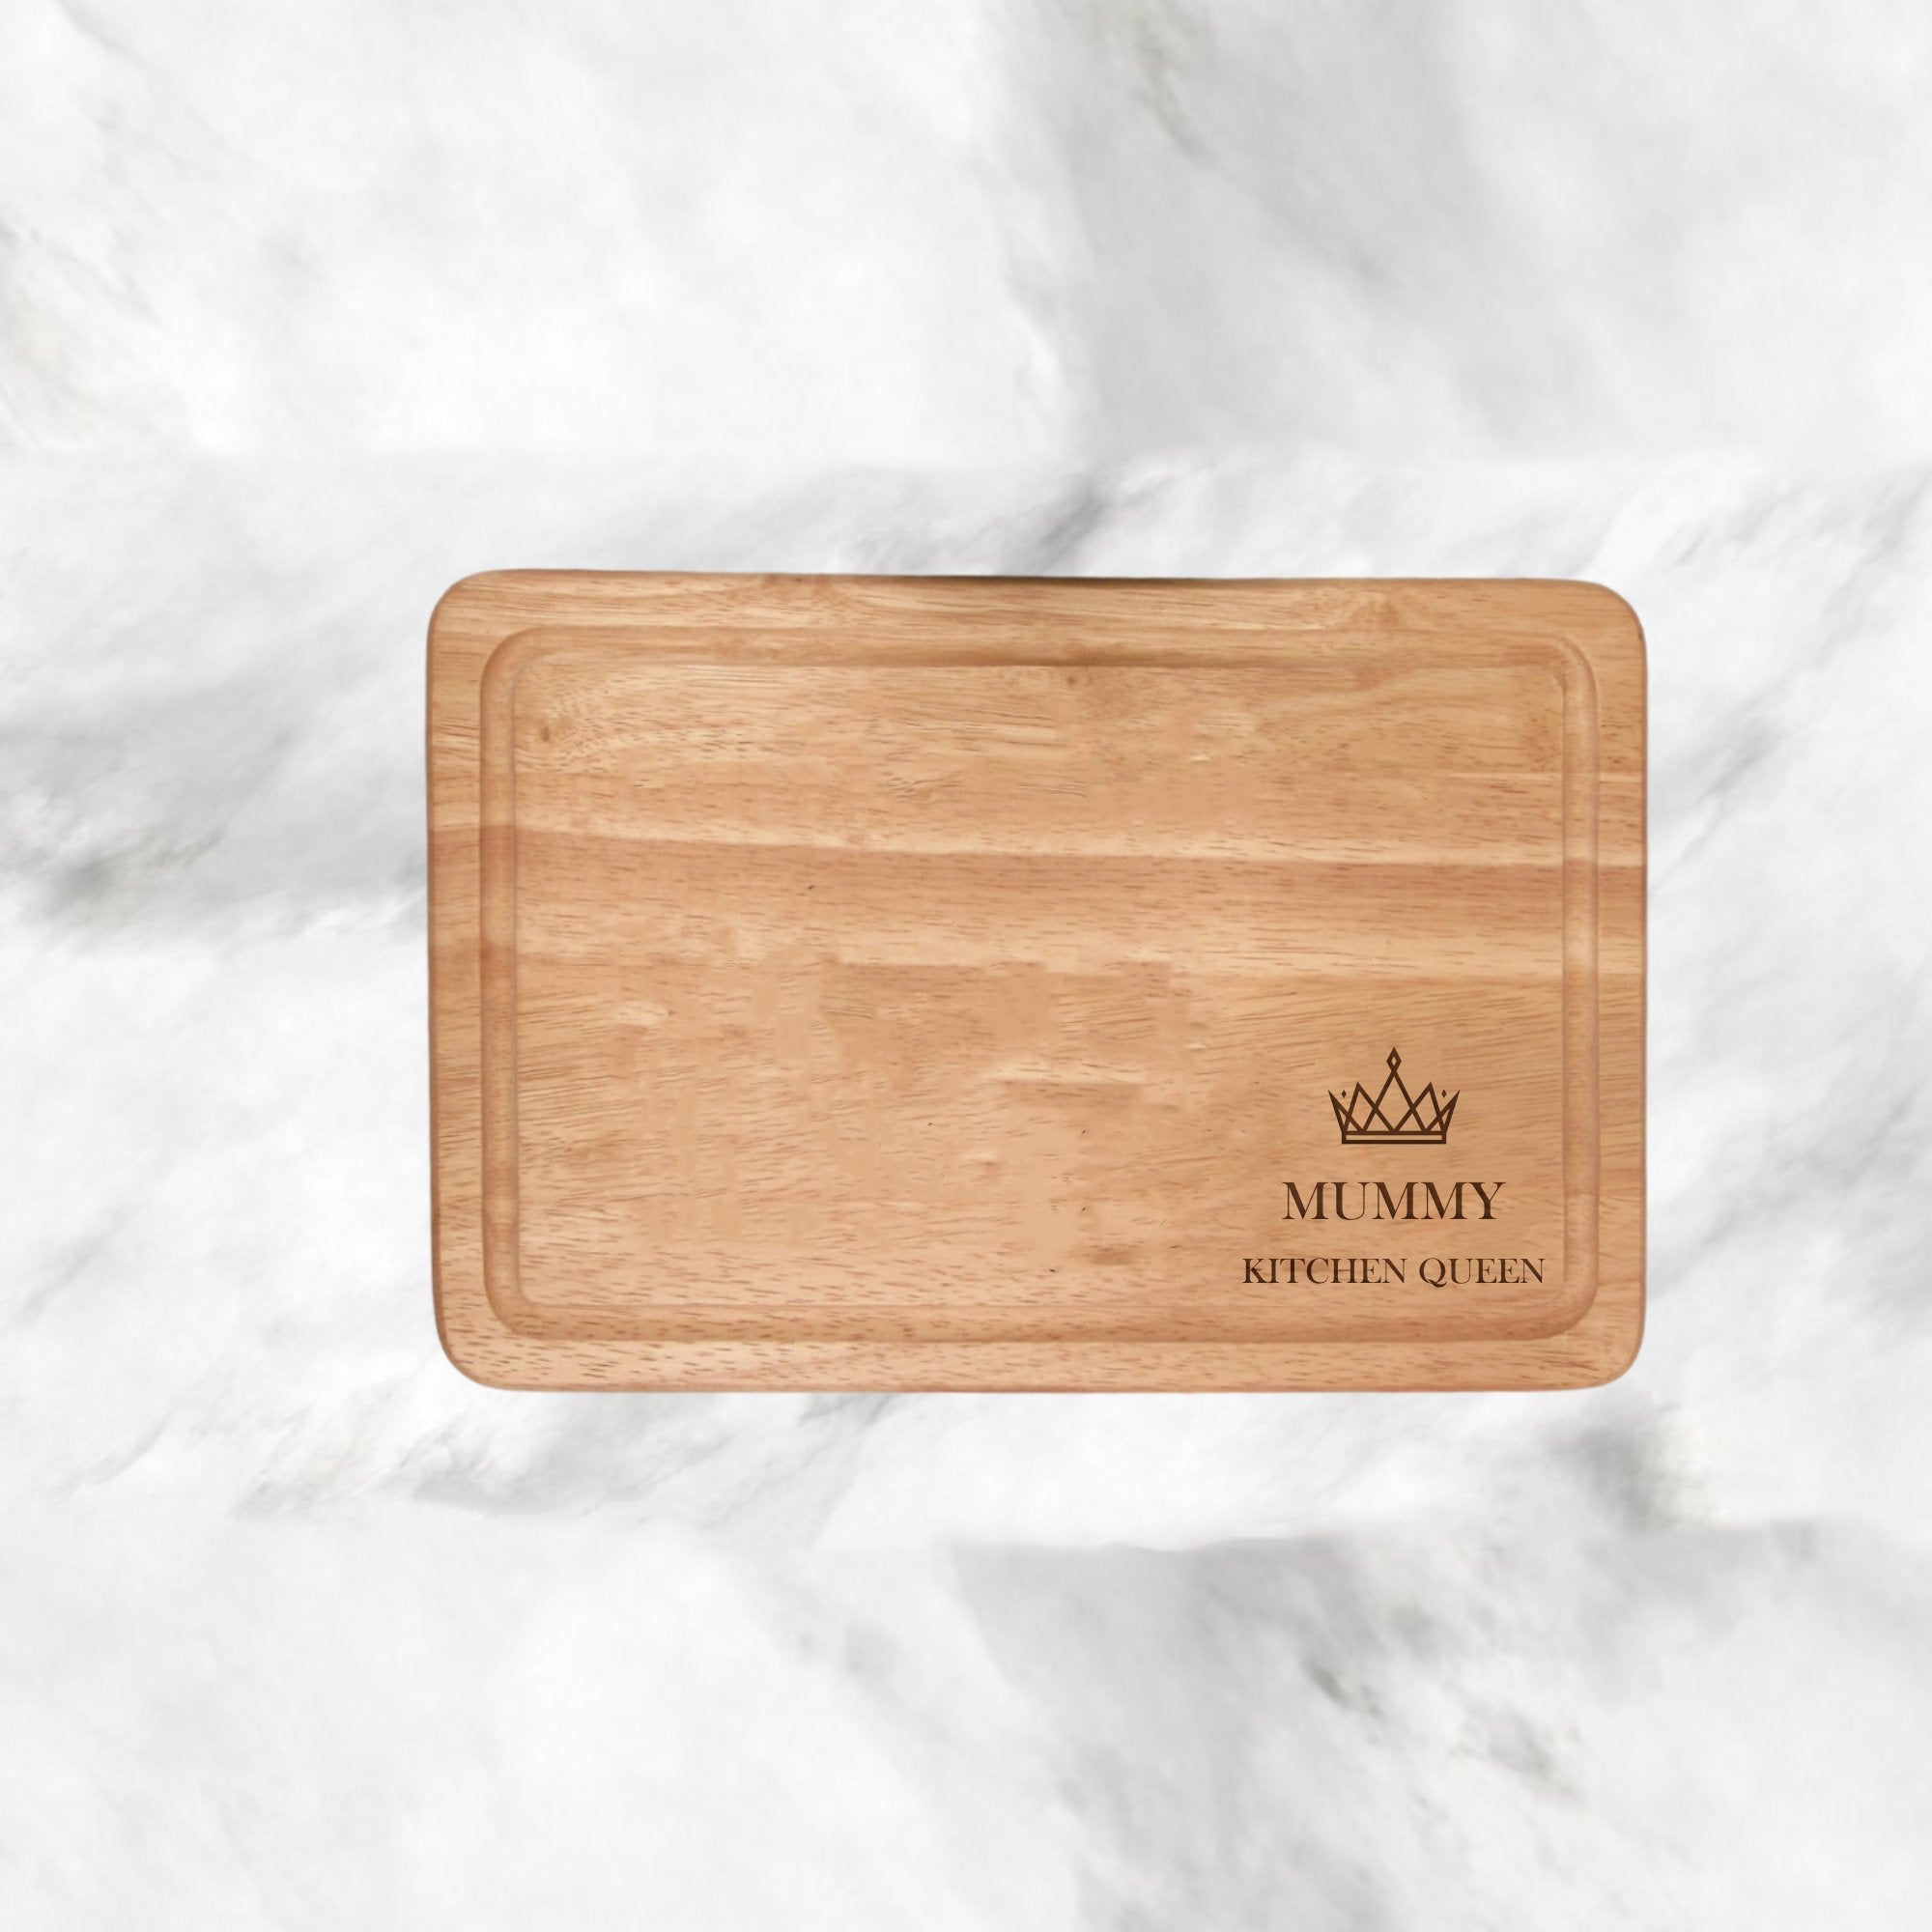 Elevate your kitchen with our Personalised Chopping Board Queen Crown Right Hand Side Design, a regal tribute to the Queen of the kitchen. Measuring 300x200mm, this premium wood board allows you to engrave two lines of text (max 20 characters each), making it an exquisite gift for birthdays, Mother’s Day, weddings, Christmas, or just to show appreciation. Crafted with precision, this board seamlessly combines practicality and sentiment, enhancing your culinary experience with personalized perfection.